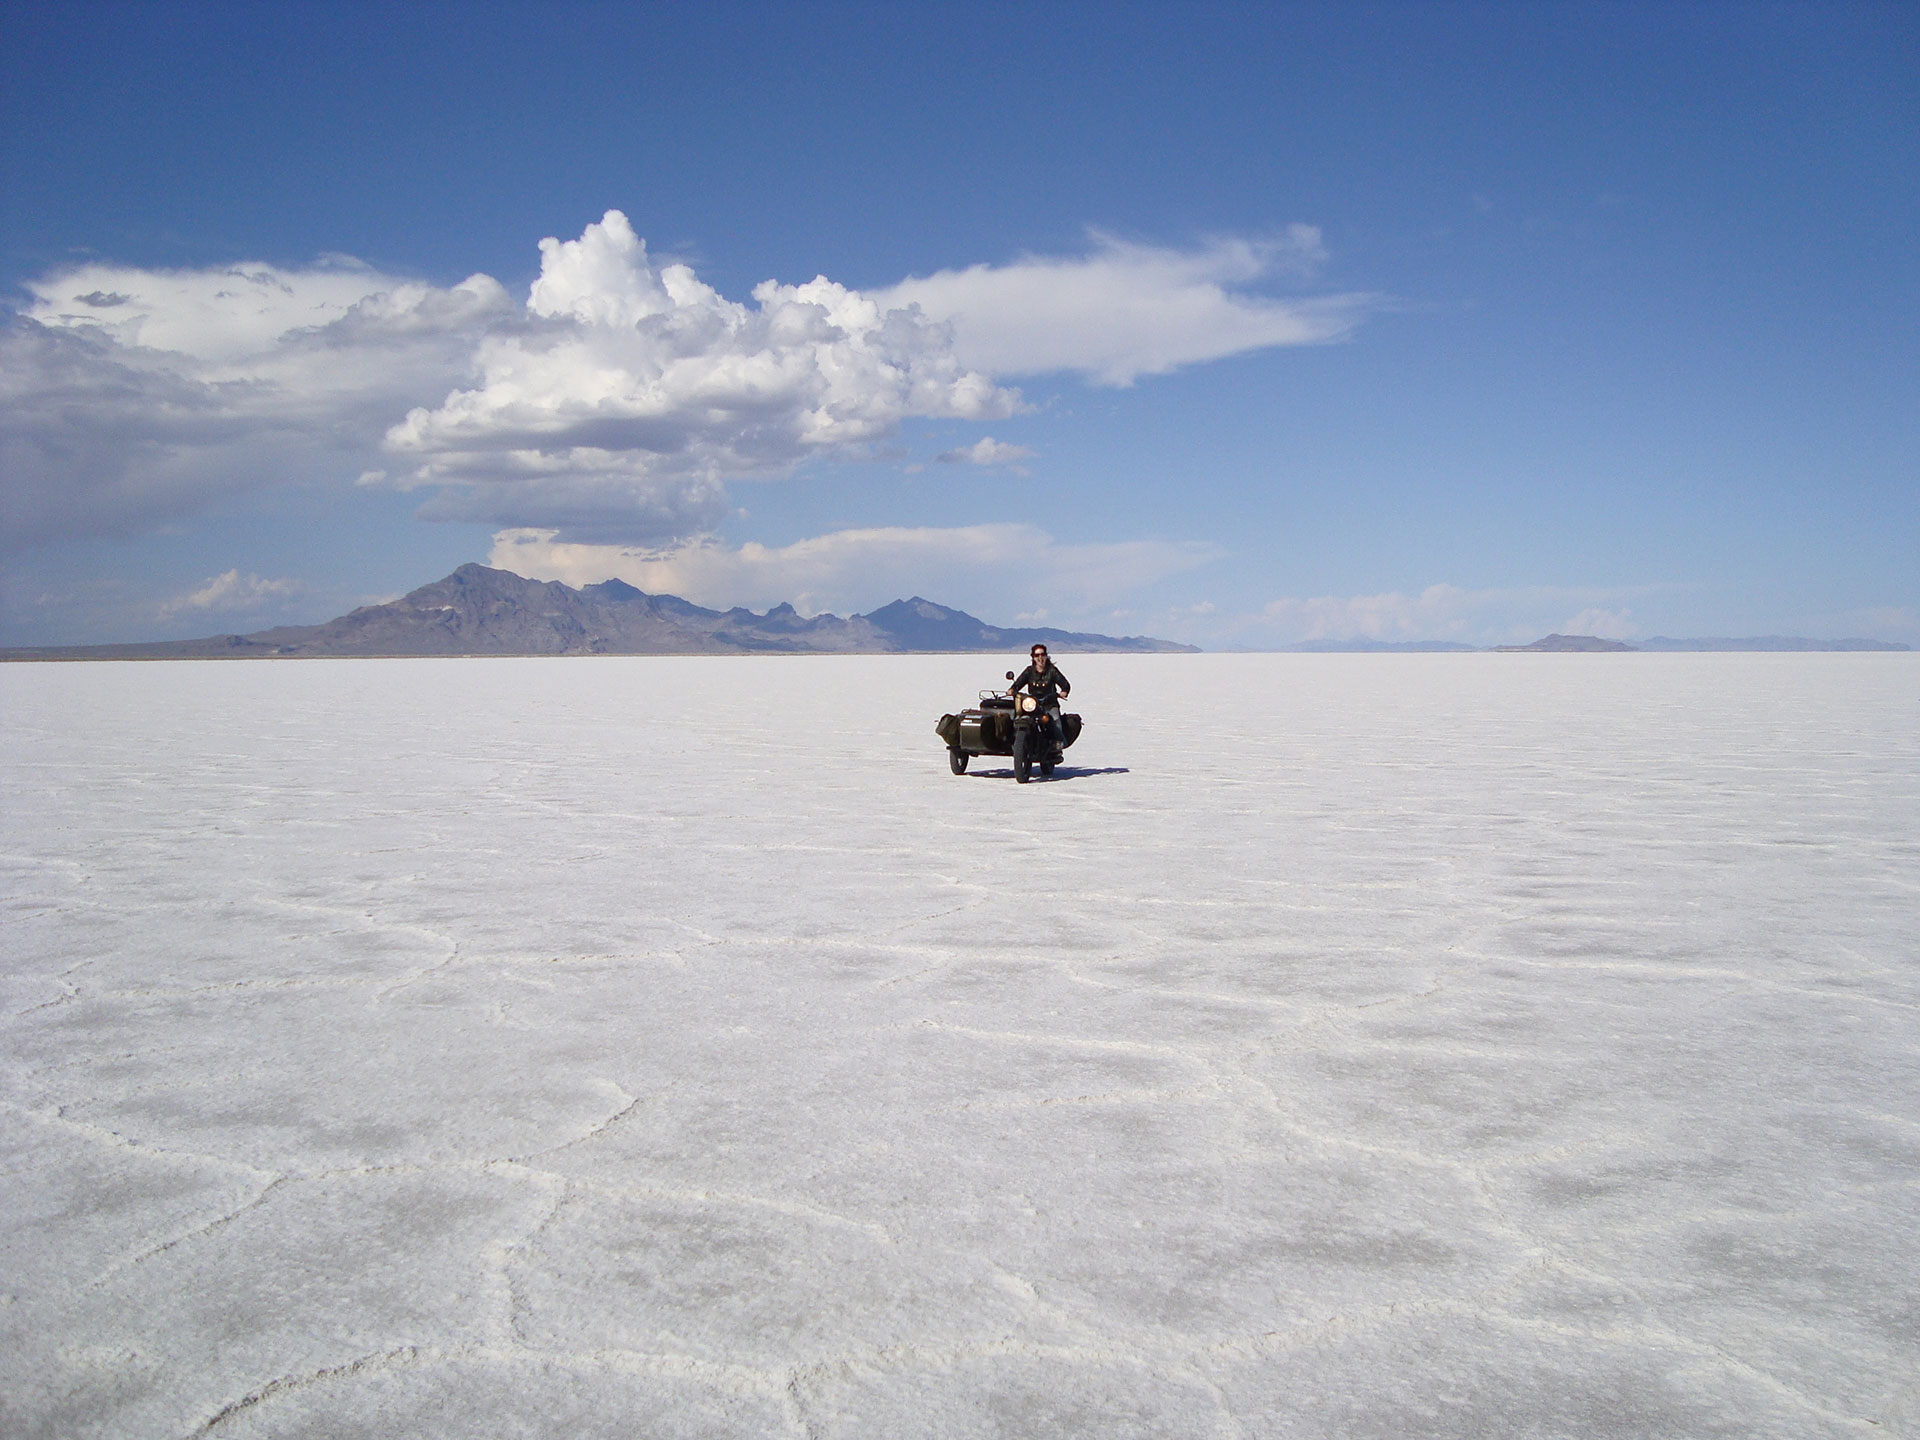 Lois Pryce riding across the bonneville salt flats with a motorbike and sidecar